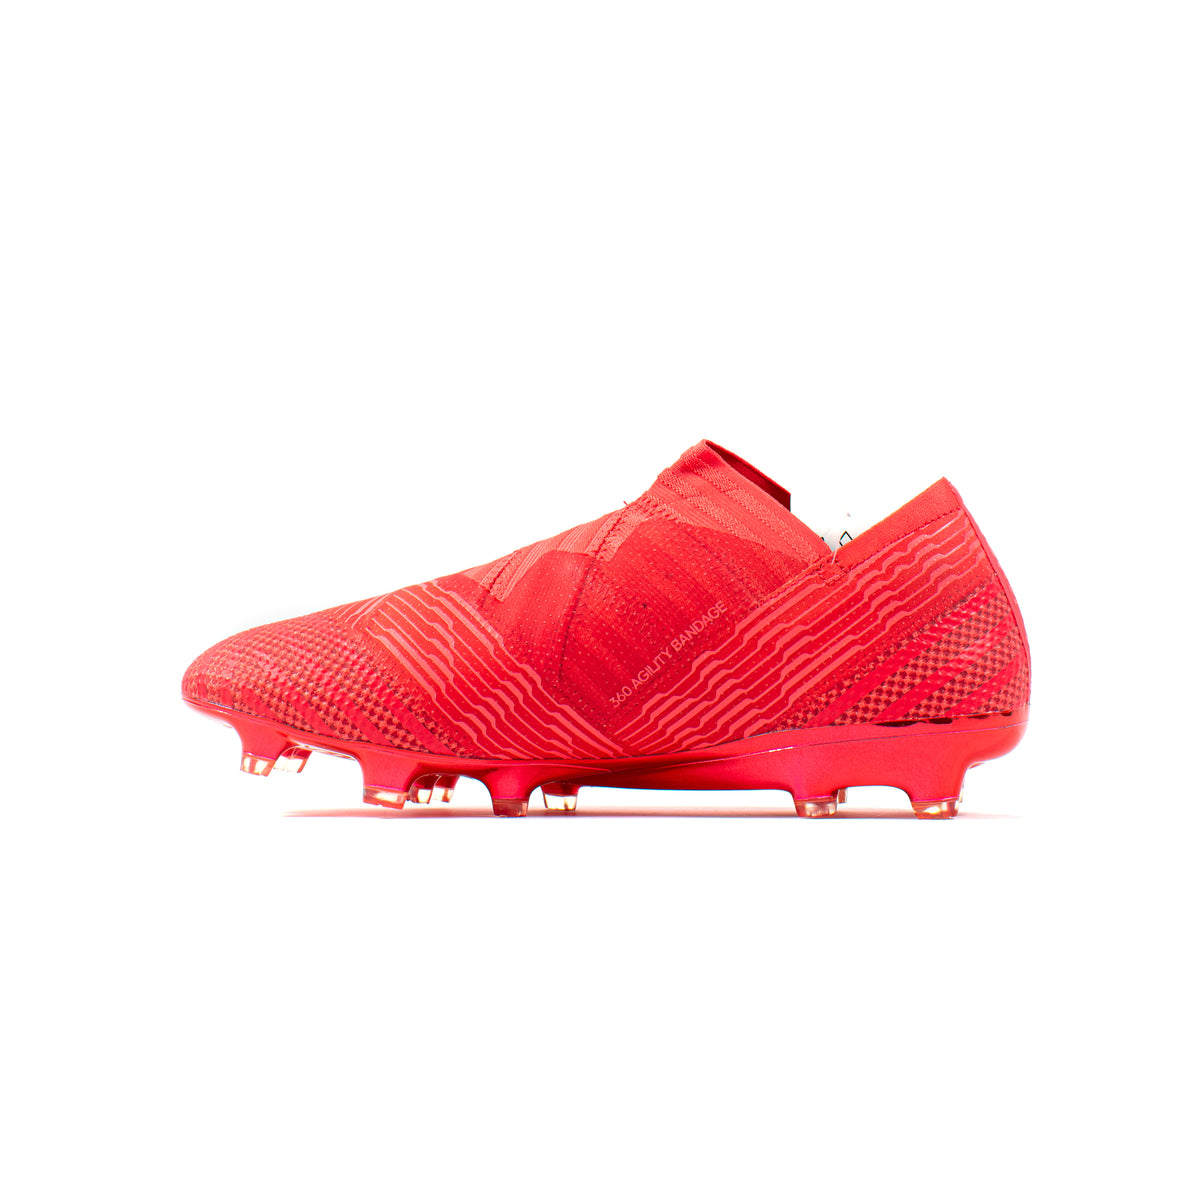 Adidas 17+ Red FG Classic Cleats